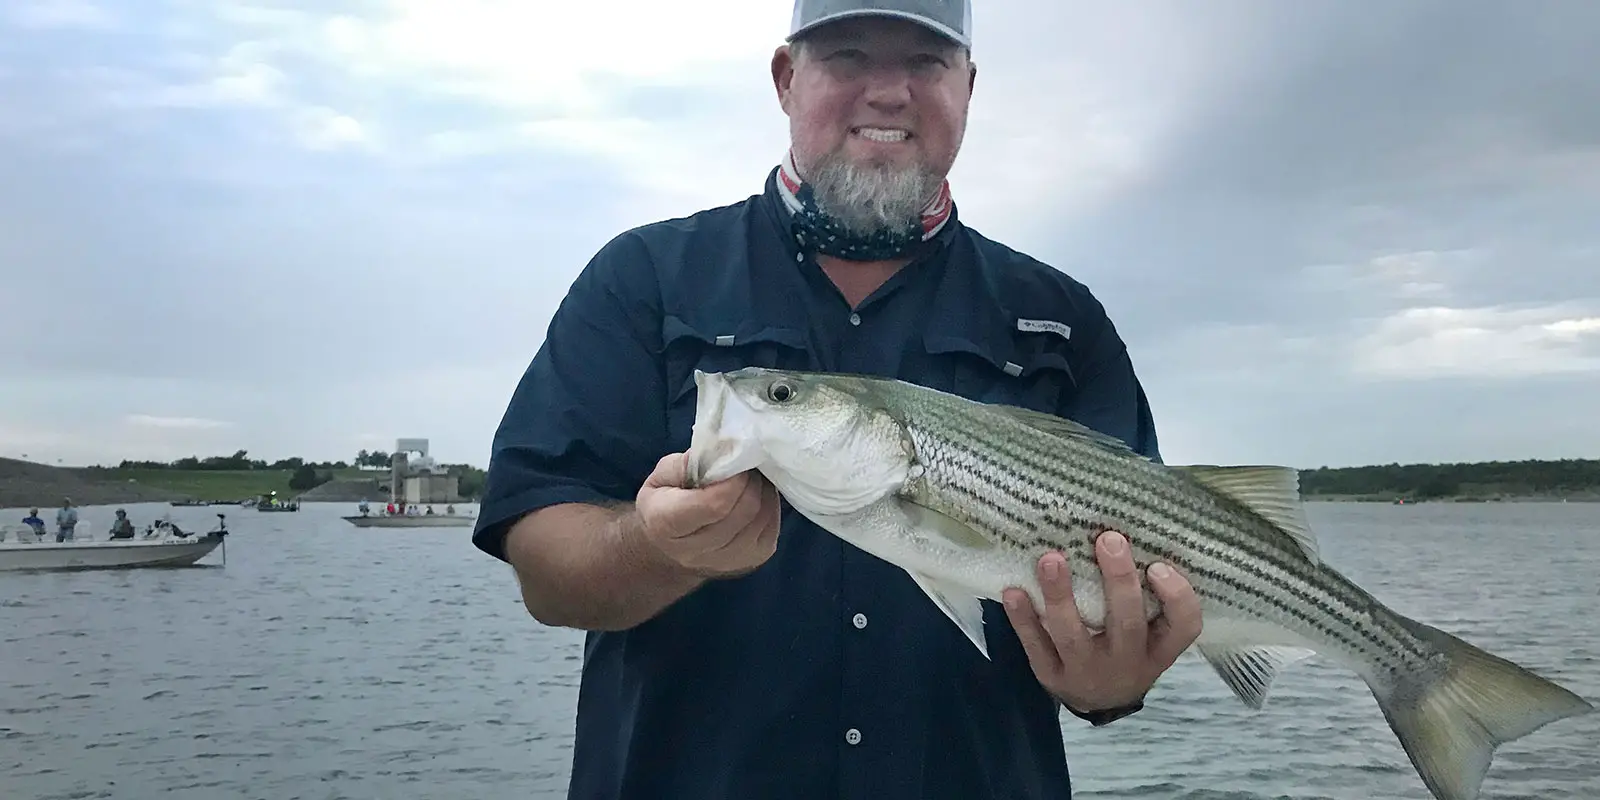 Trolling an Umbrella Rig for Striped Bass 